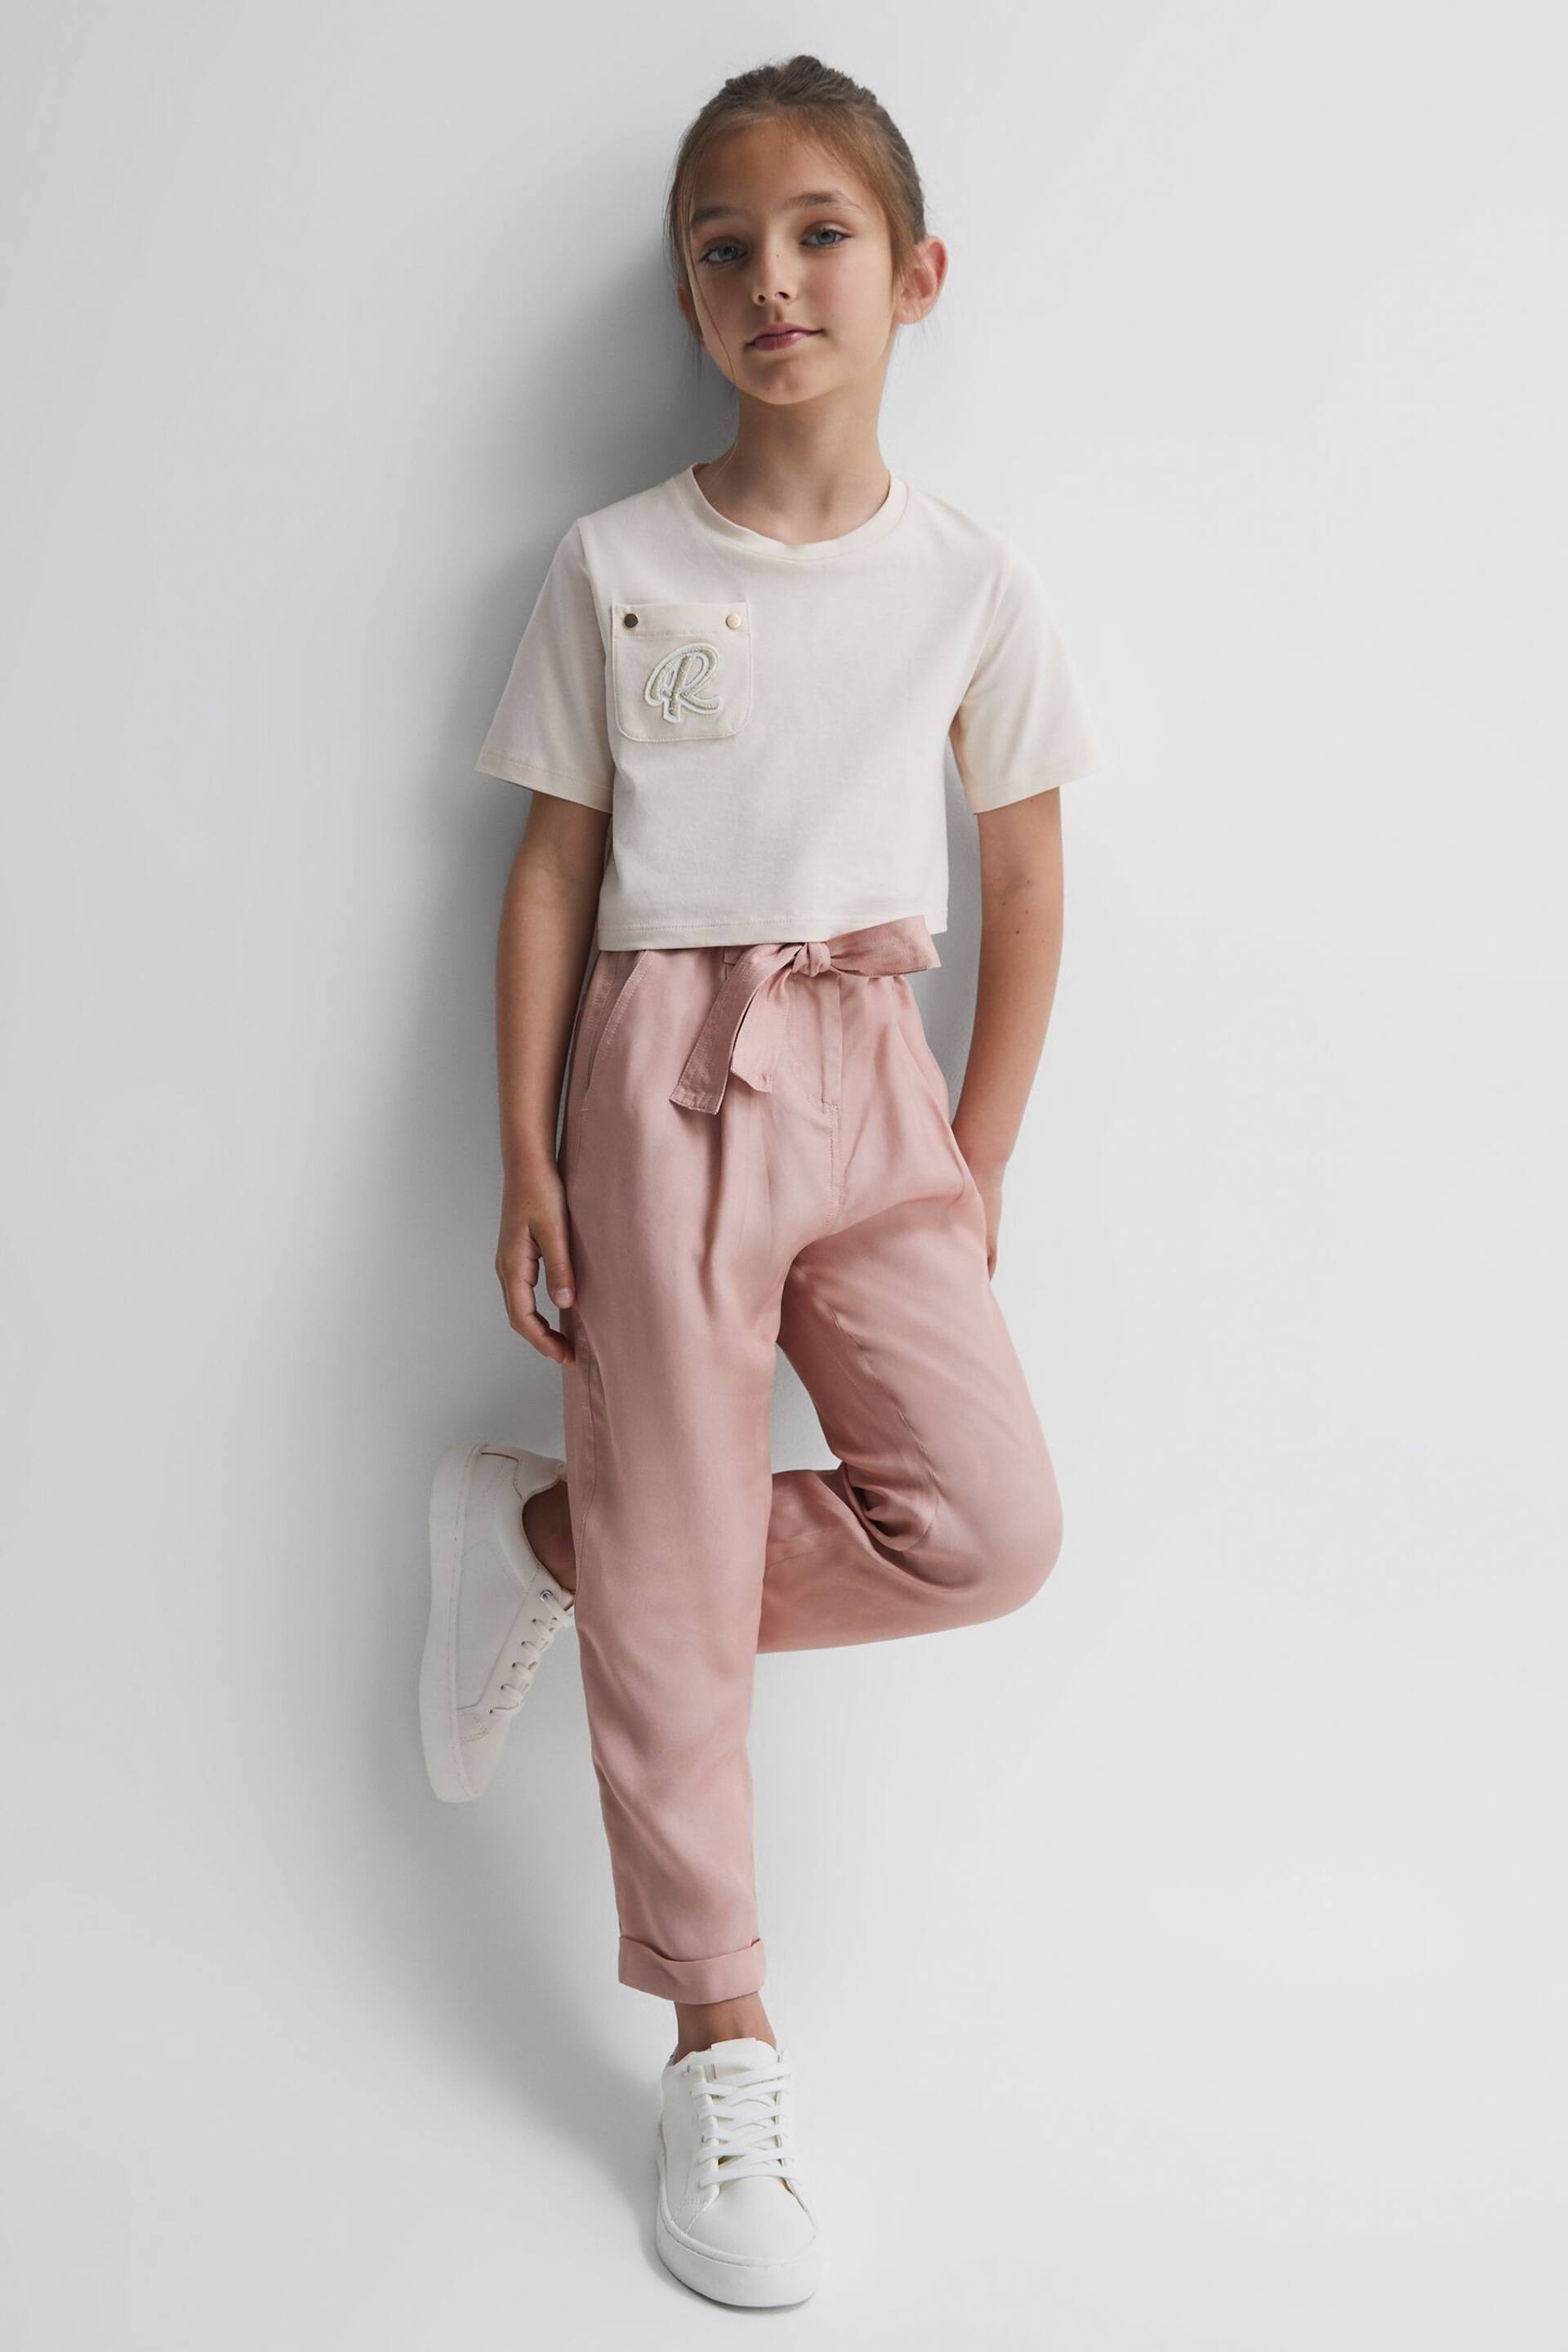 Reiss Pink Joanie Senior Paper Bag Cargo Trousers - Image 1 of 5